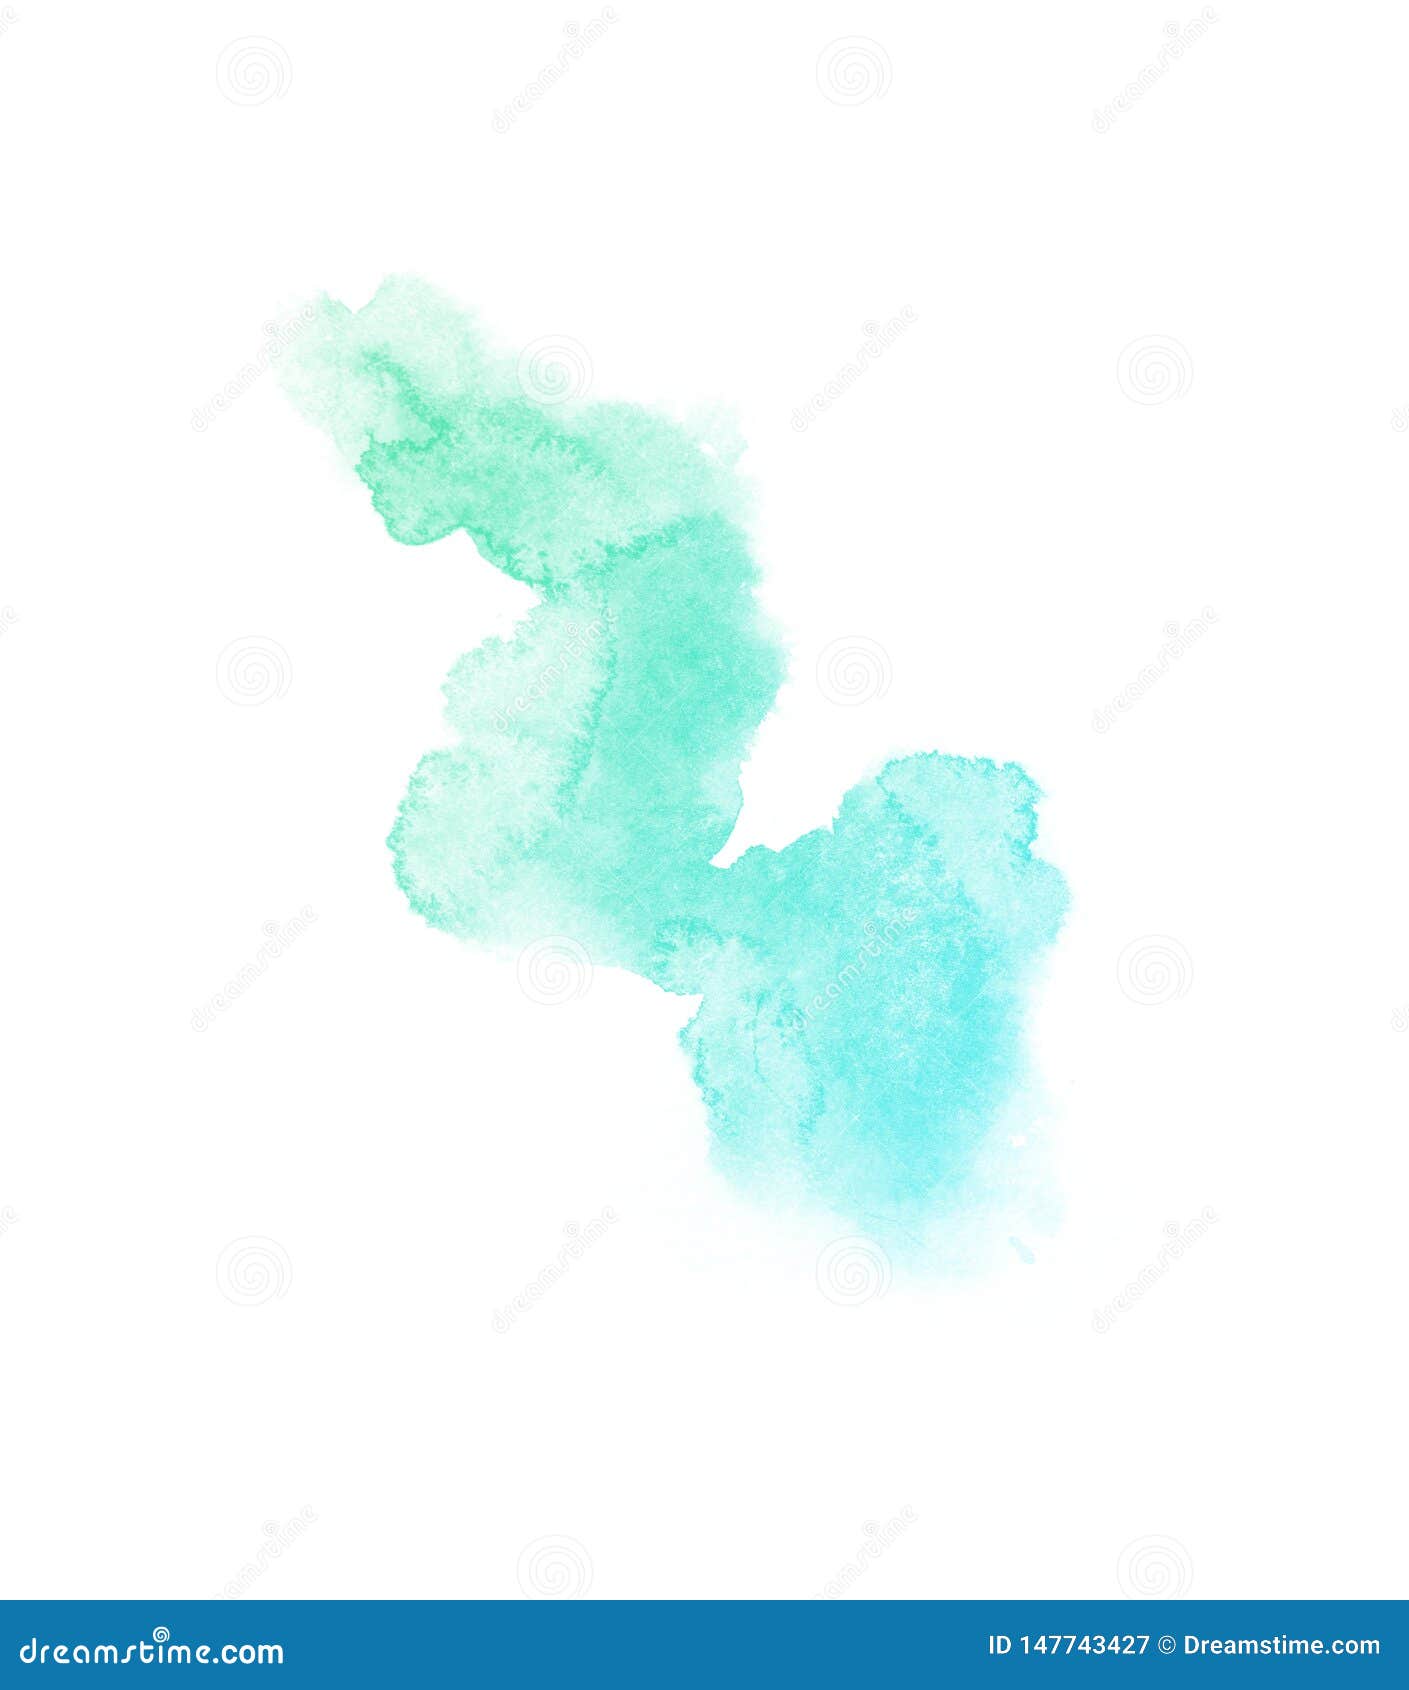 Ombre Splash Watercolor Background With Place For Text